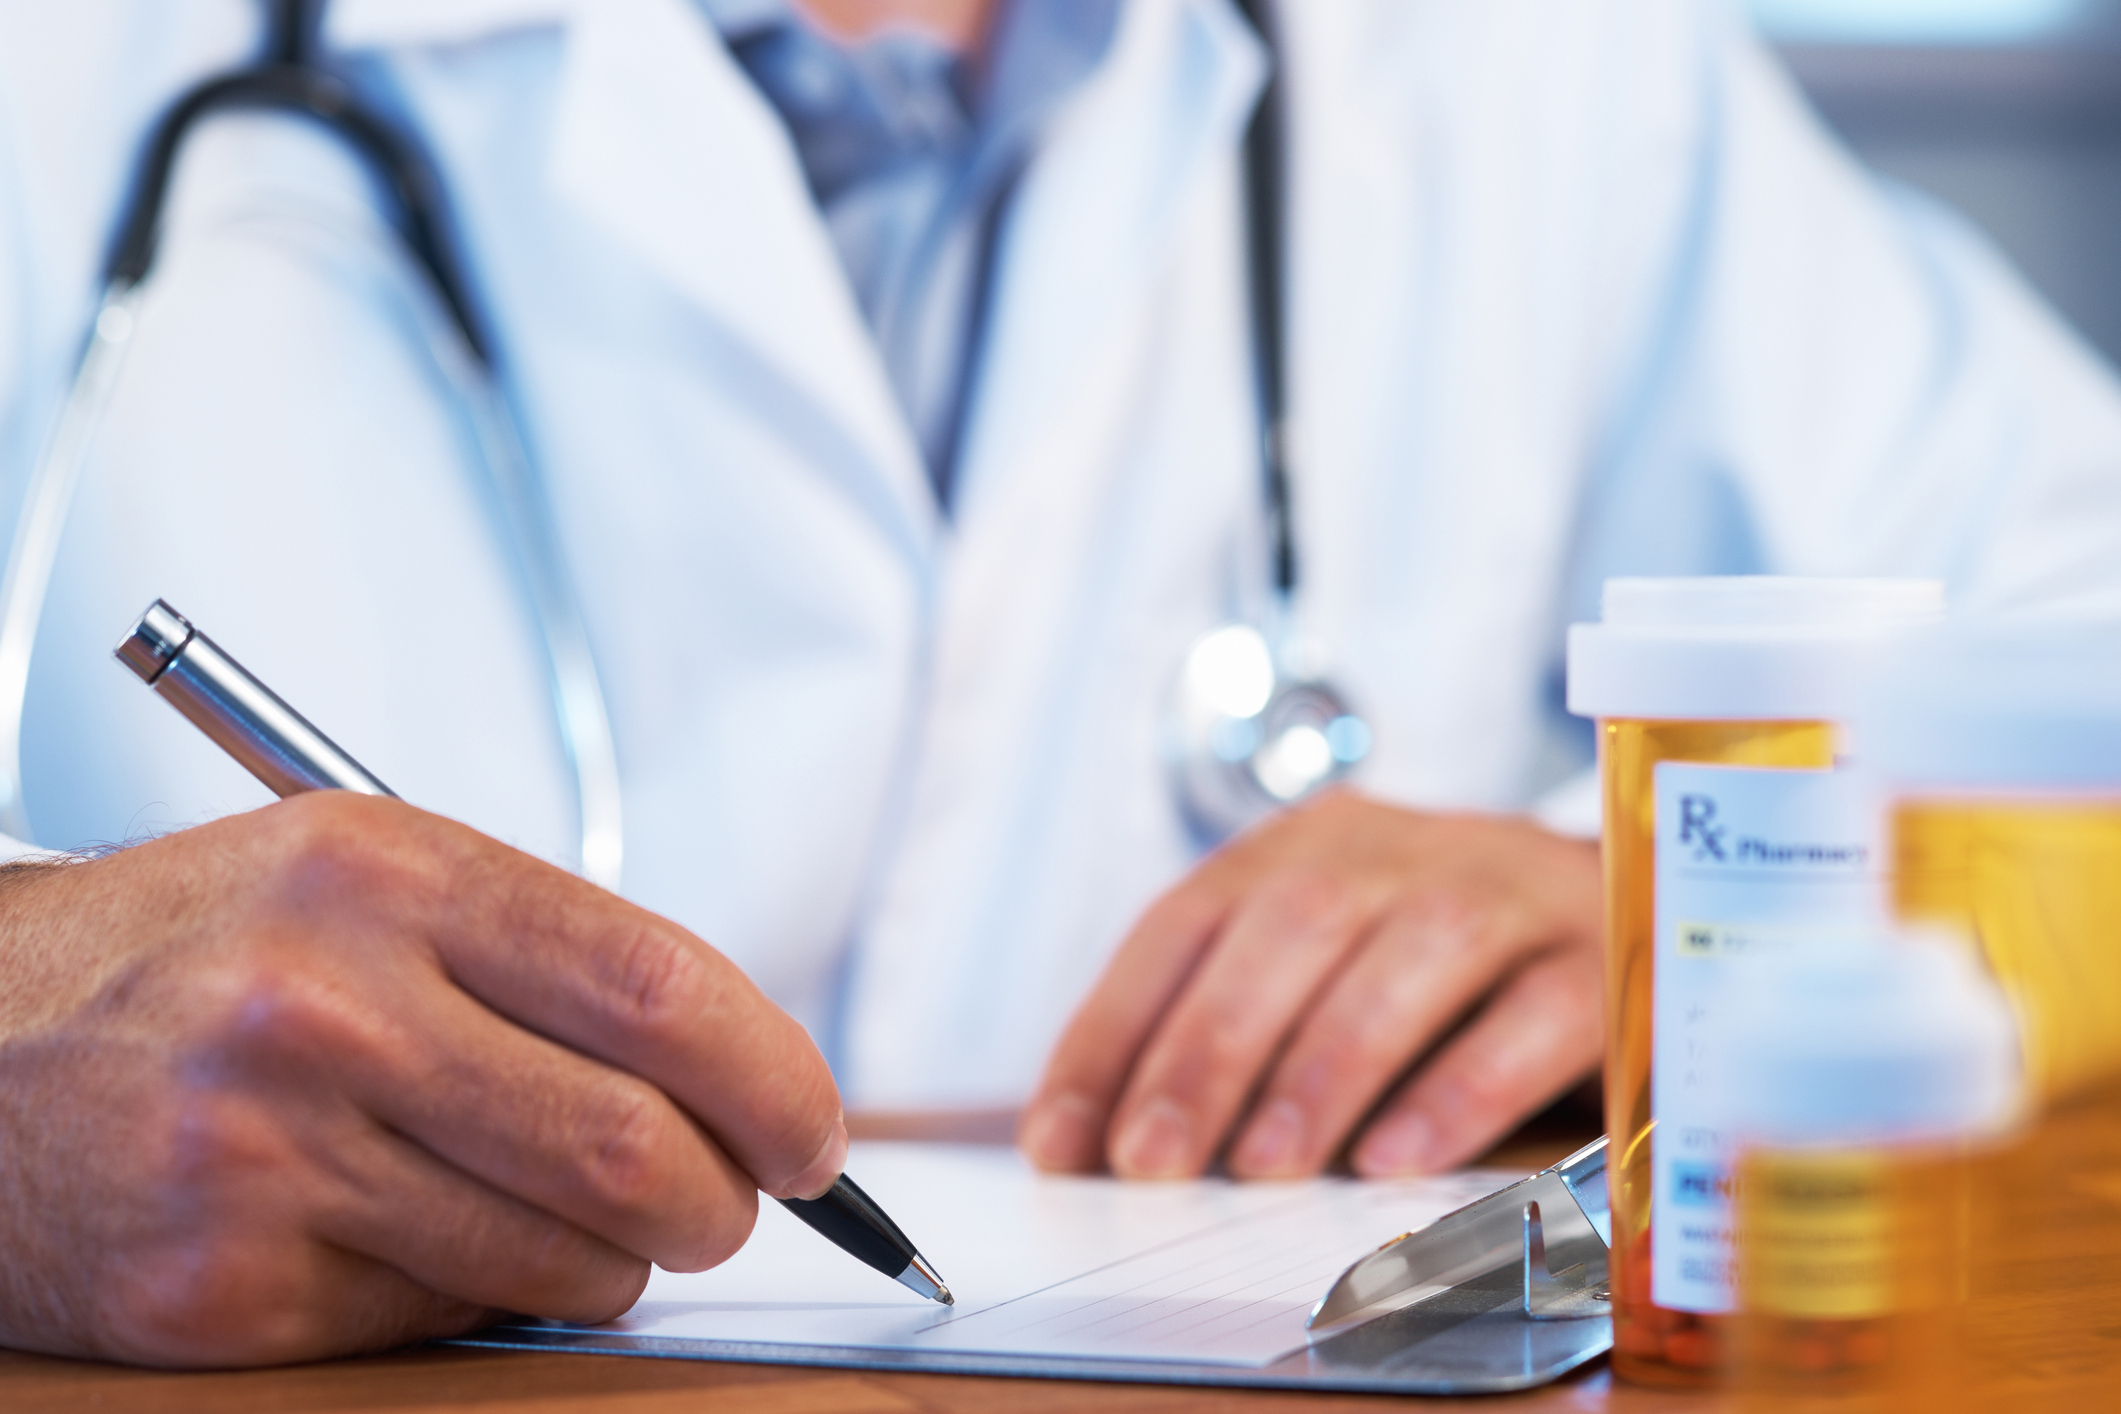 Not getting a medication schedule from your doctor